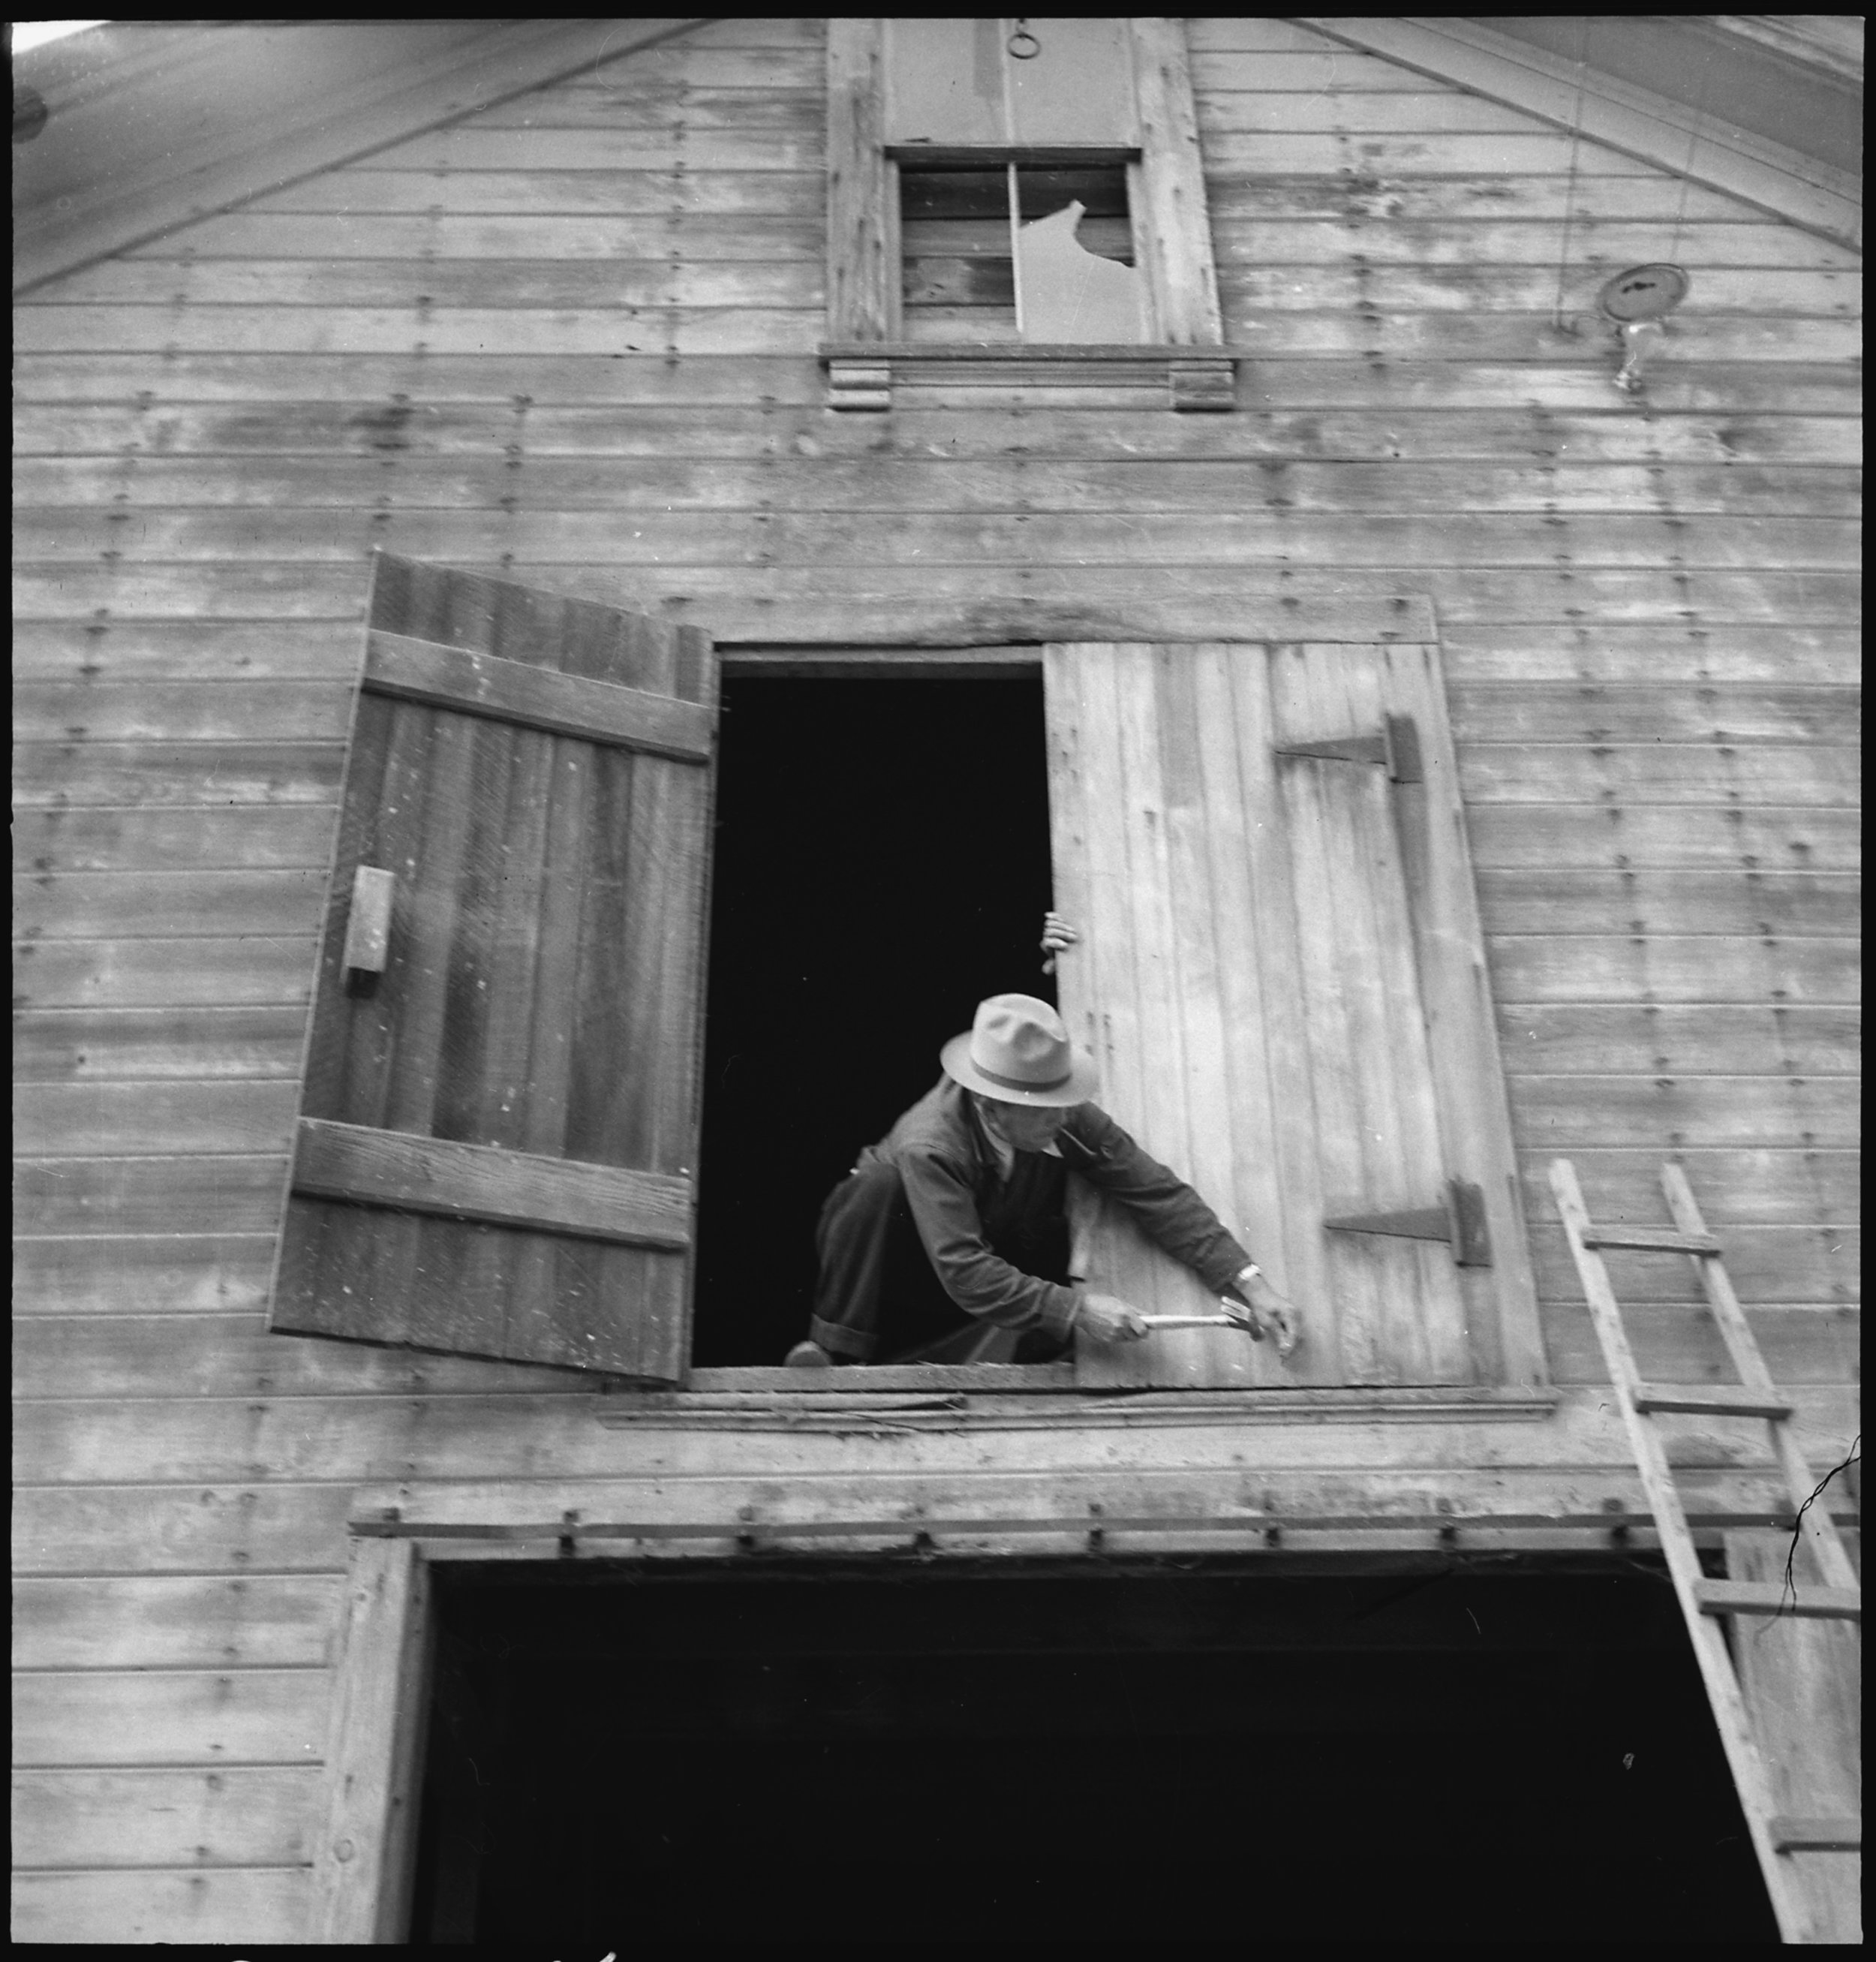  Centerville, California. Nailing the hayloft door on the morning of evacuation. Farmers and other evacuees of Japanese ancestry will be given opportunities to follow their callings at War Relocation Authority centers where they will spend the durati